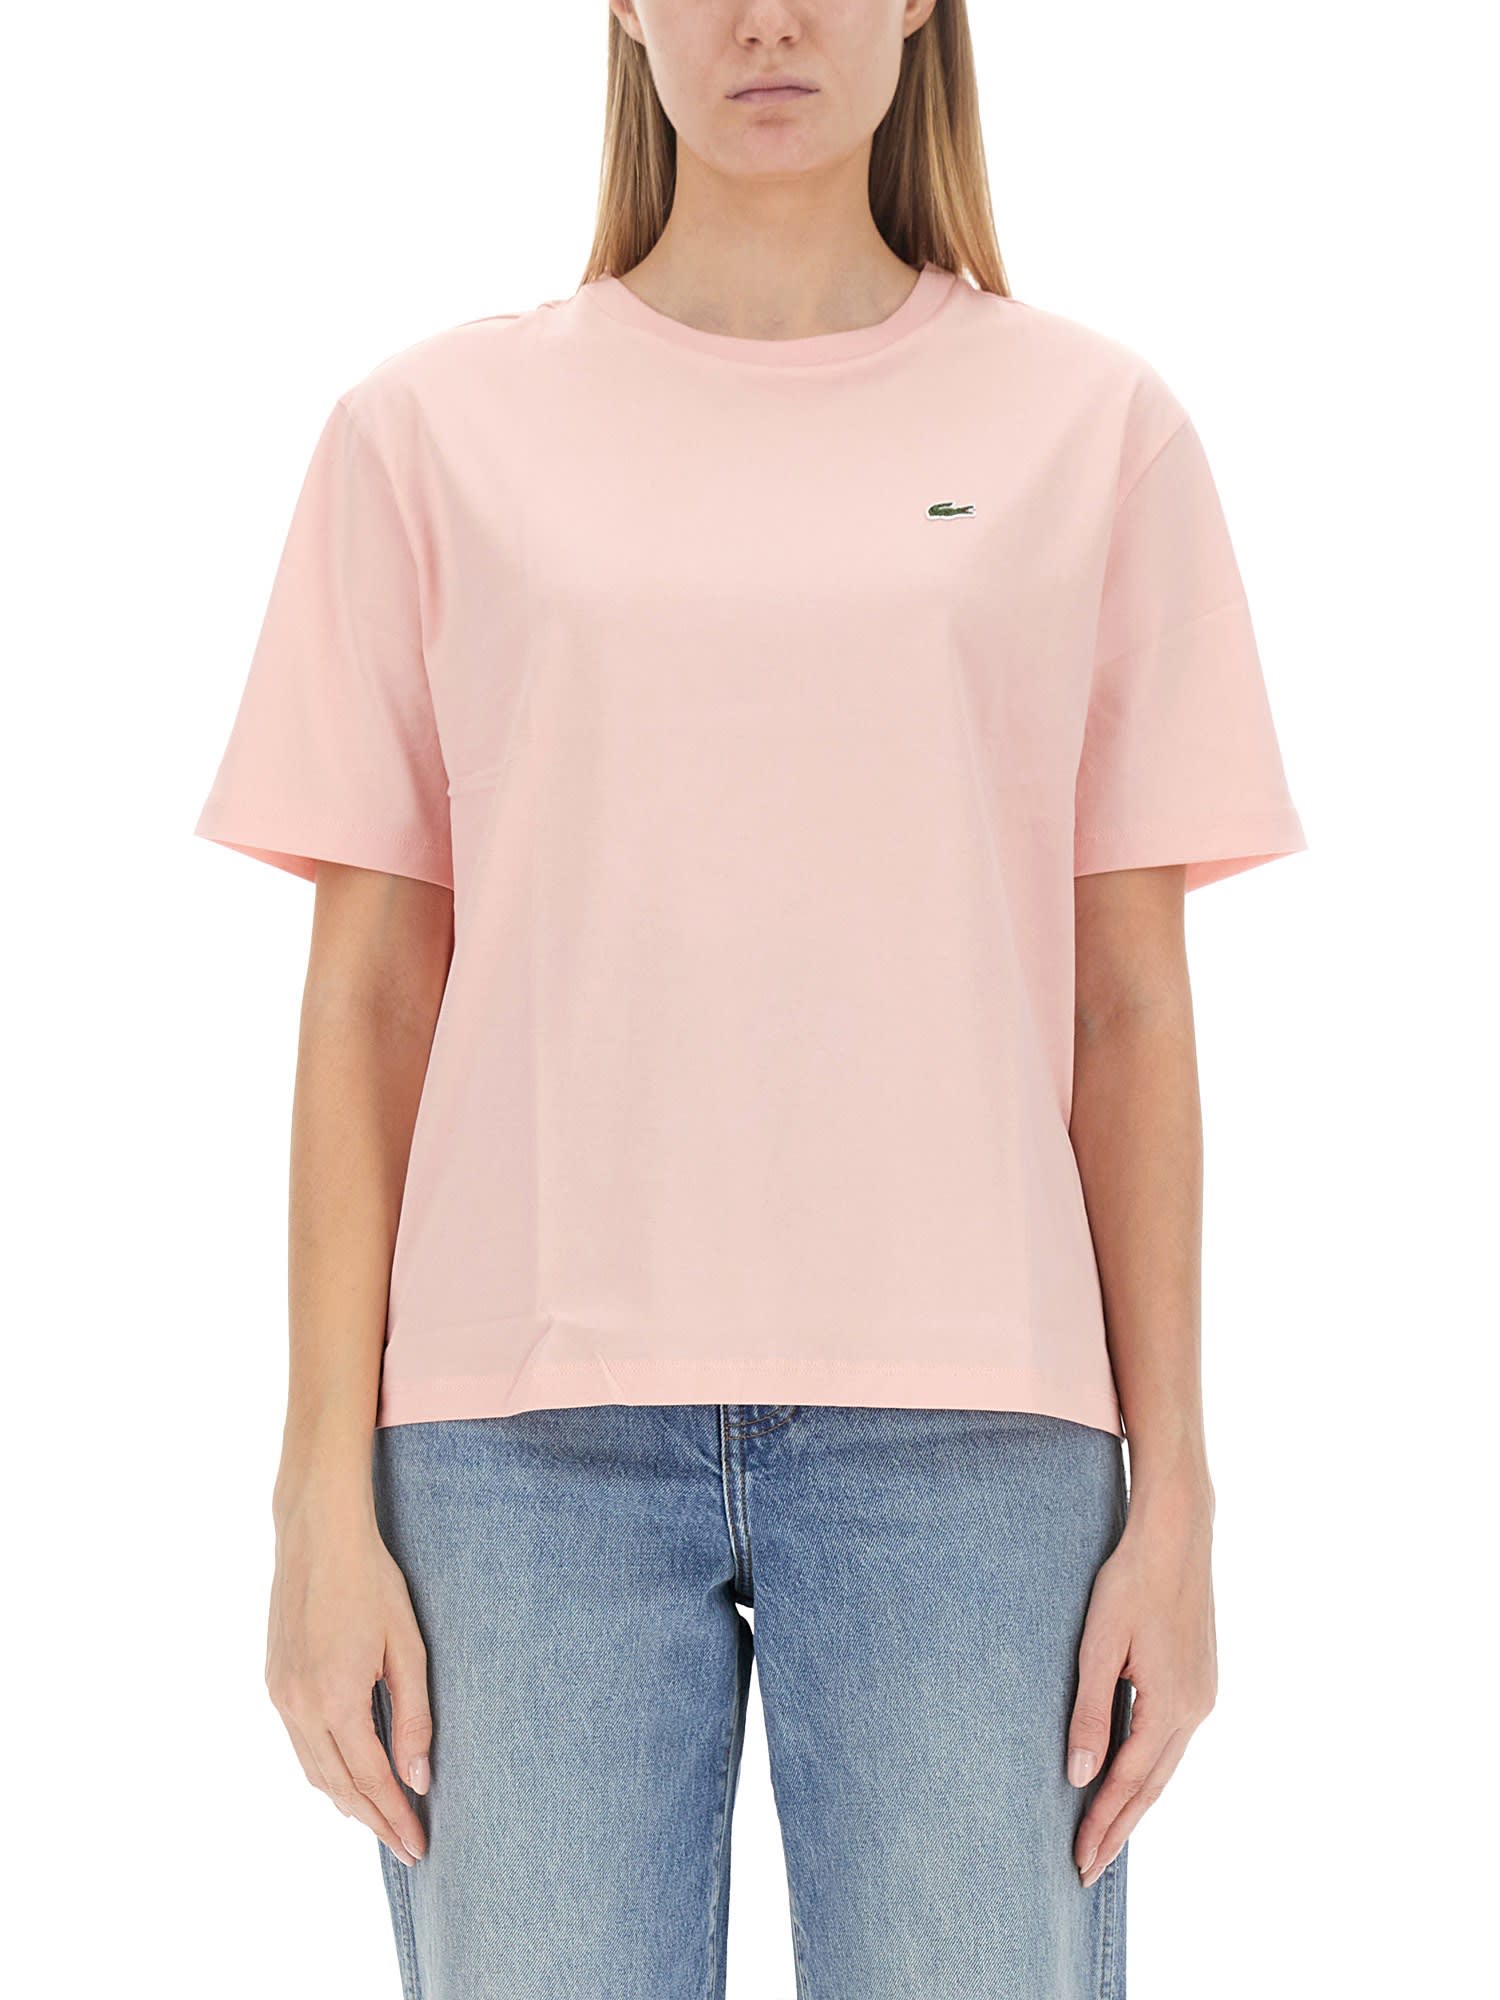 LACOSTE T-SHIRT WITH LOGO